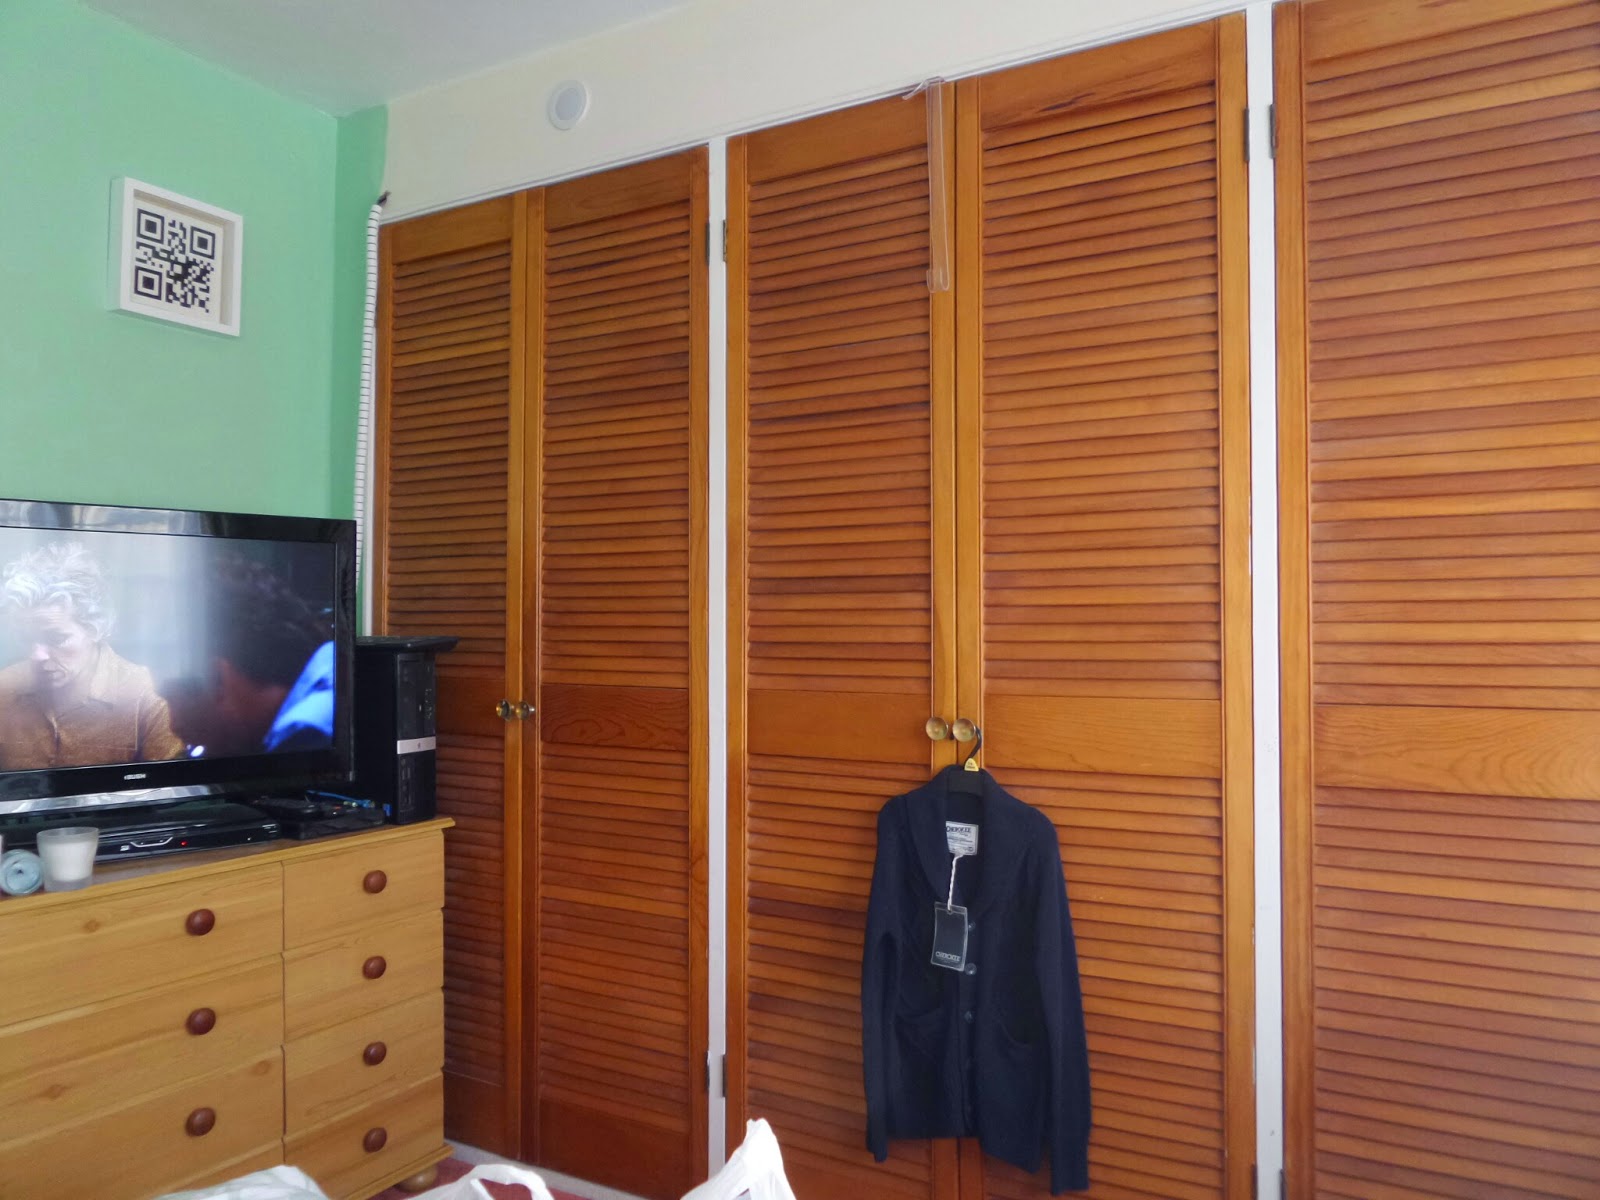 The wardrobes and "my" side of the bedroom